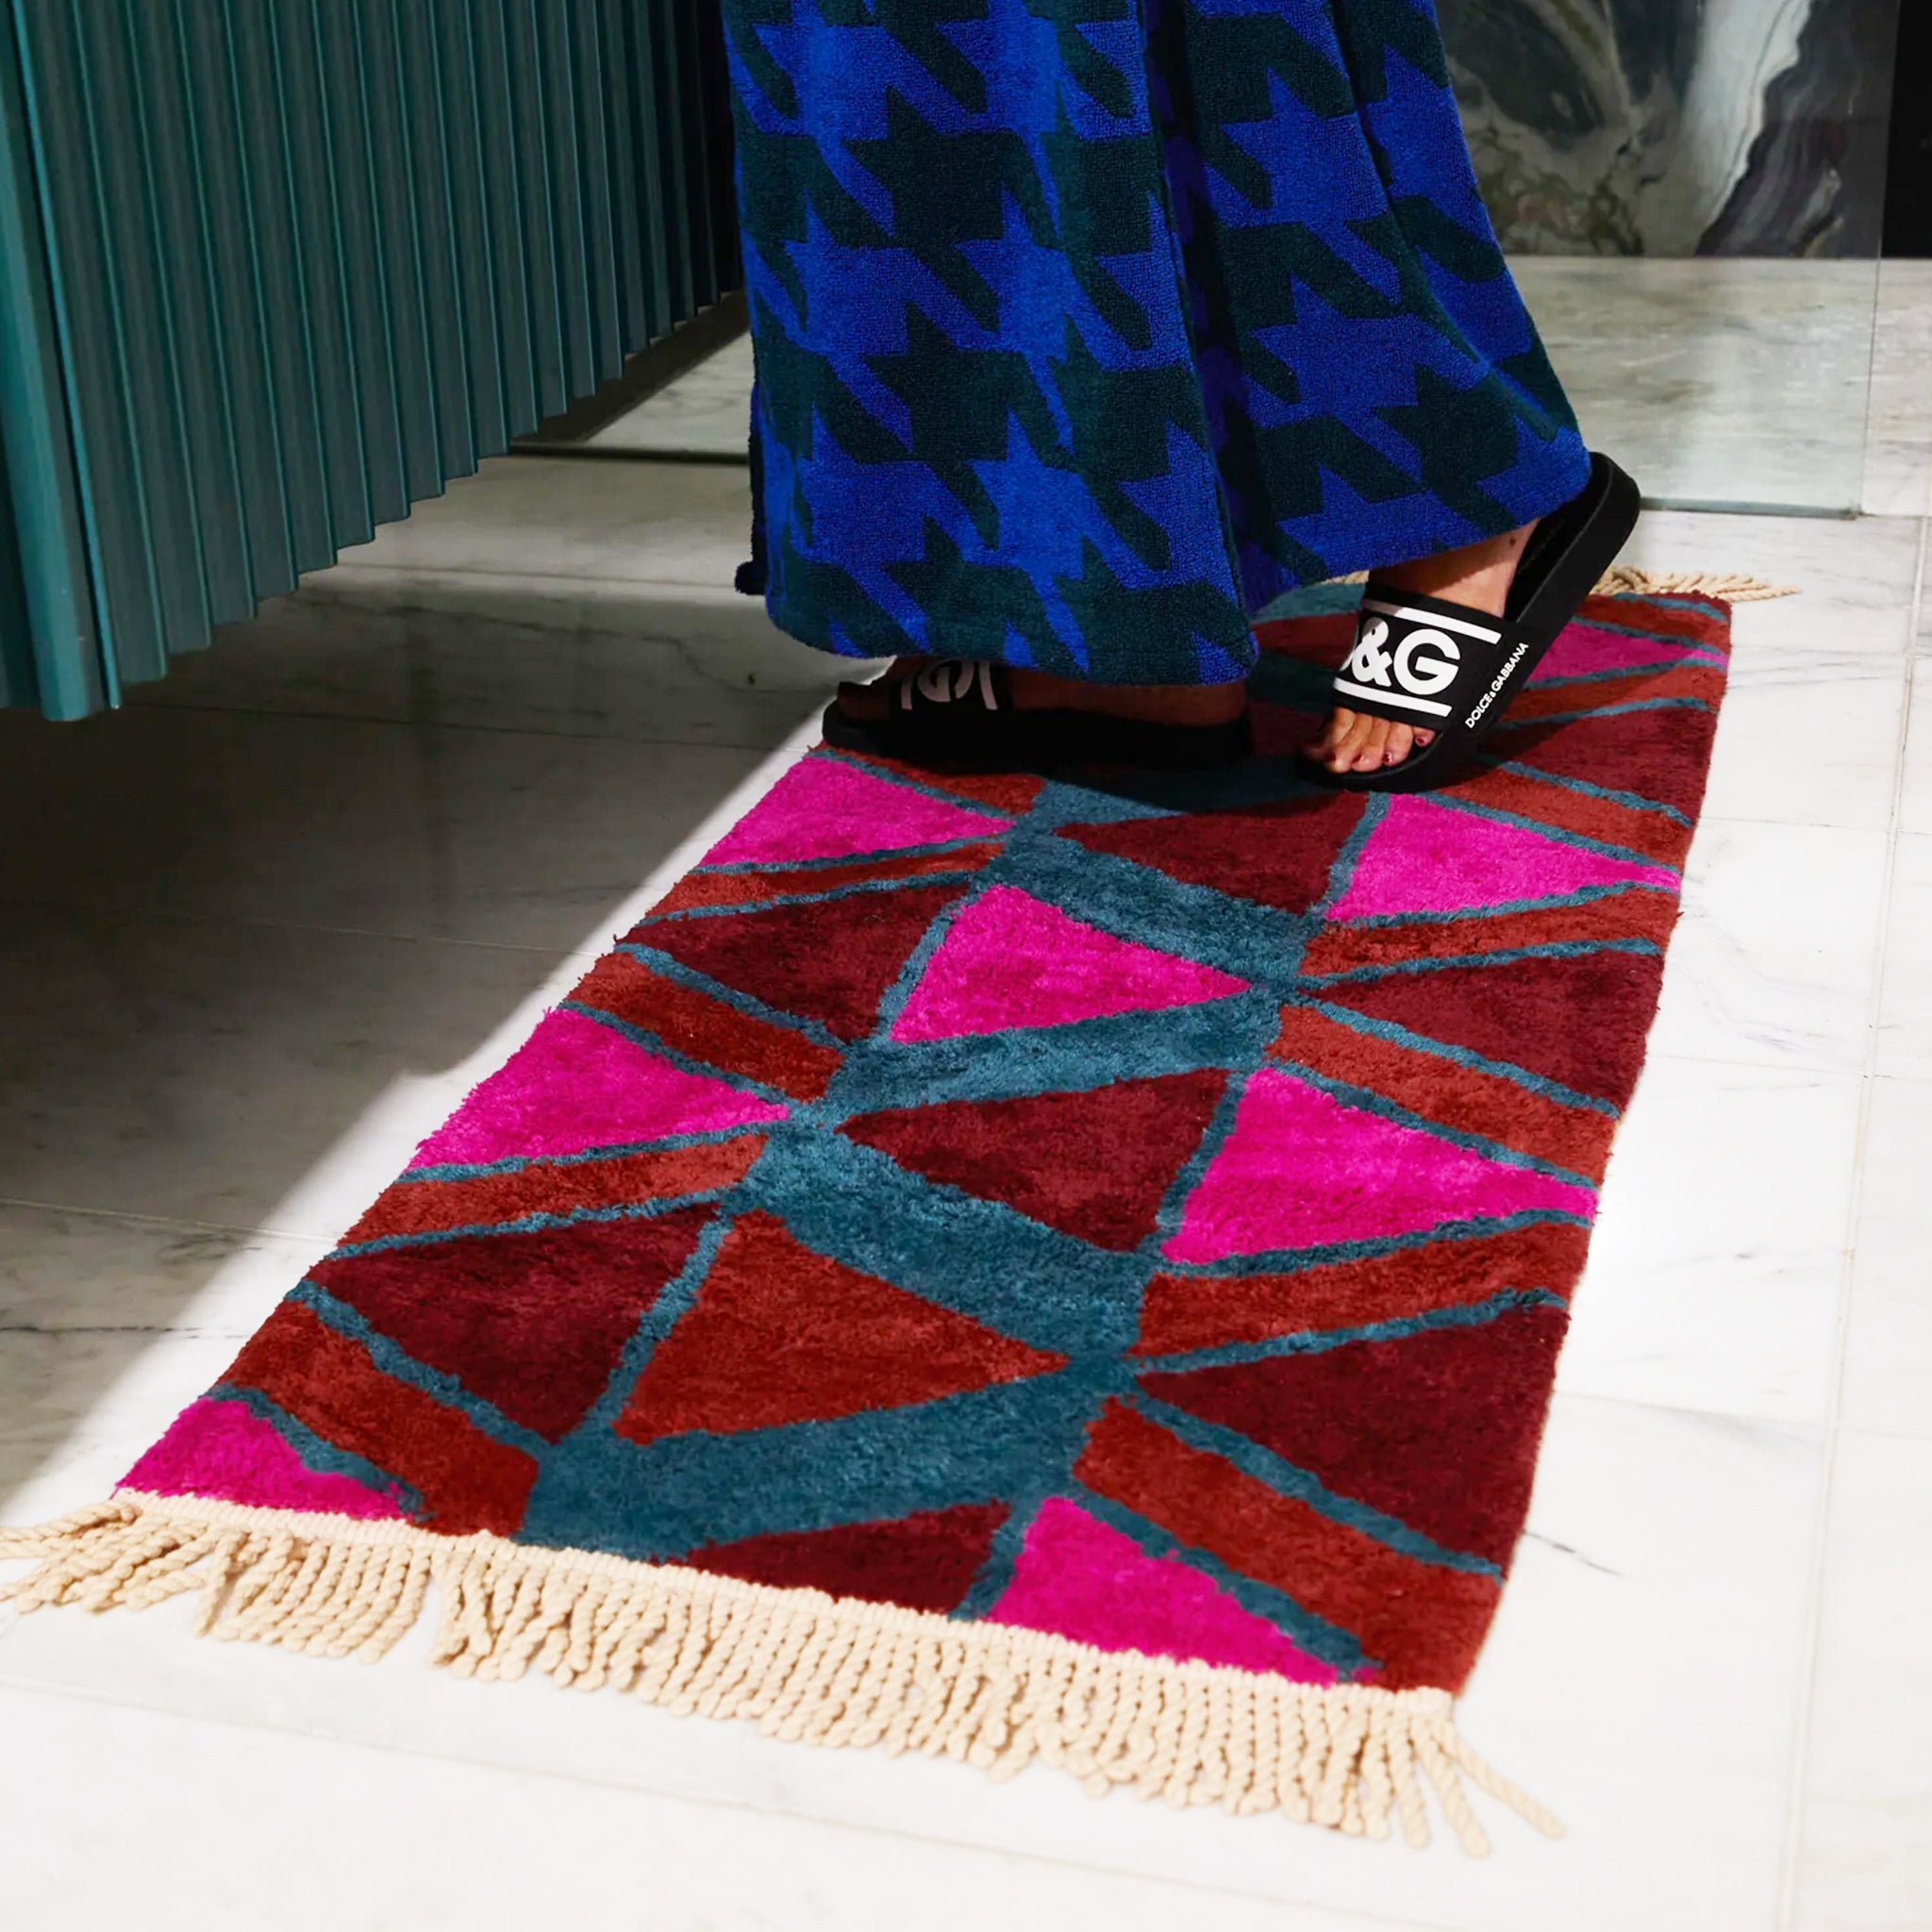 A pink, red, rust and teal triangle patterned bath mat with tassel details on the two ends.